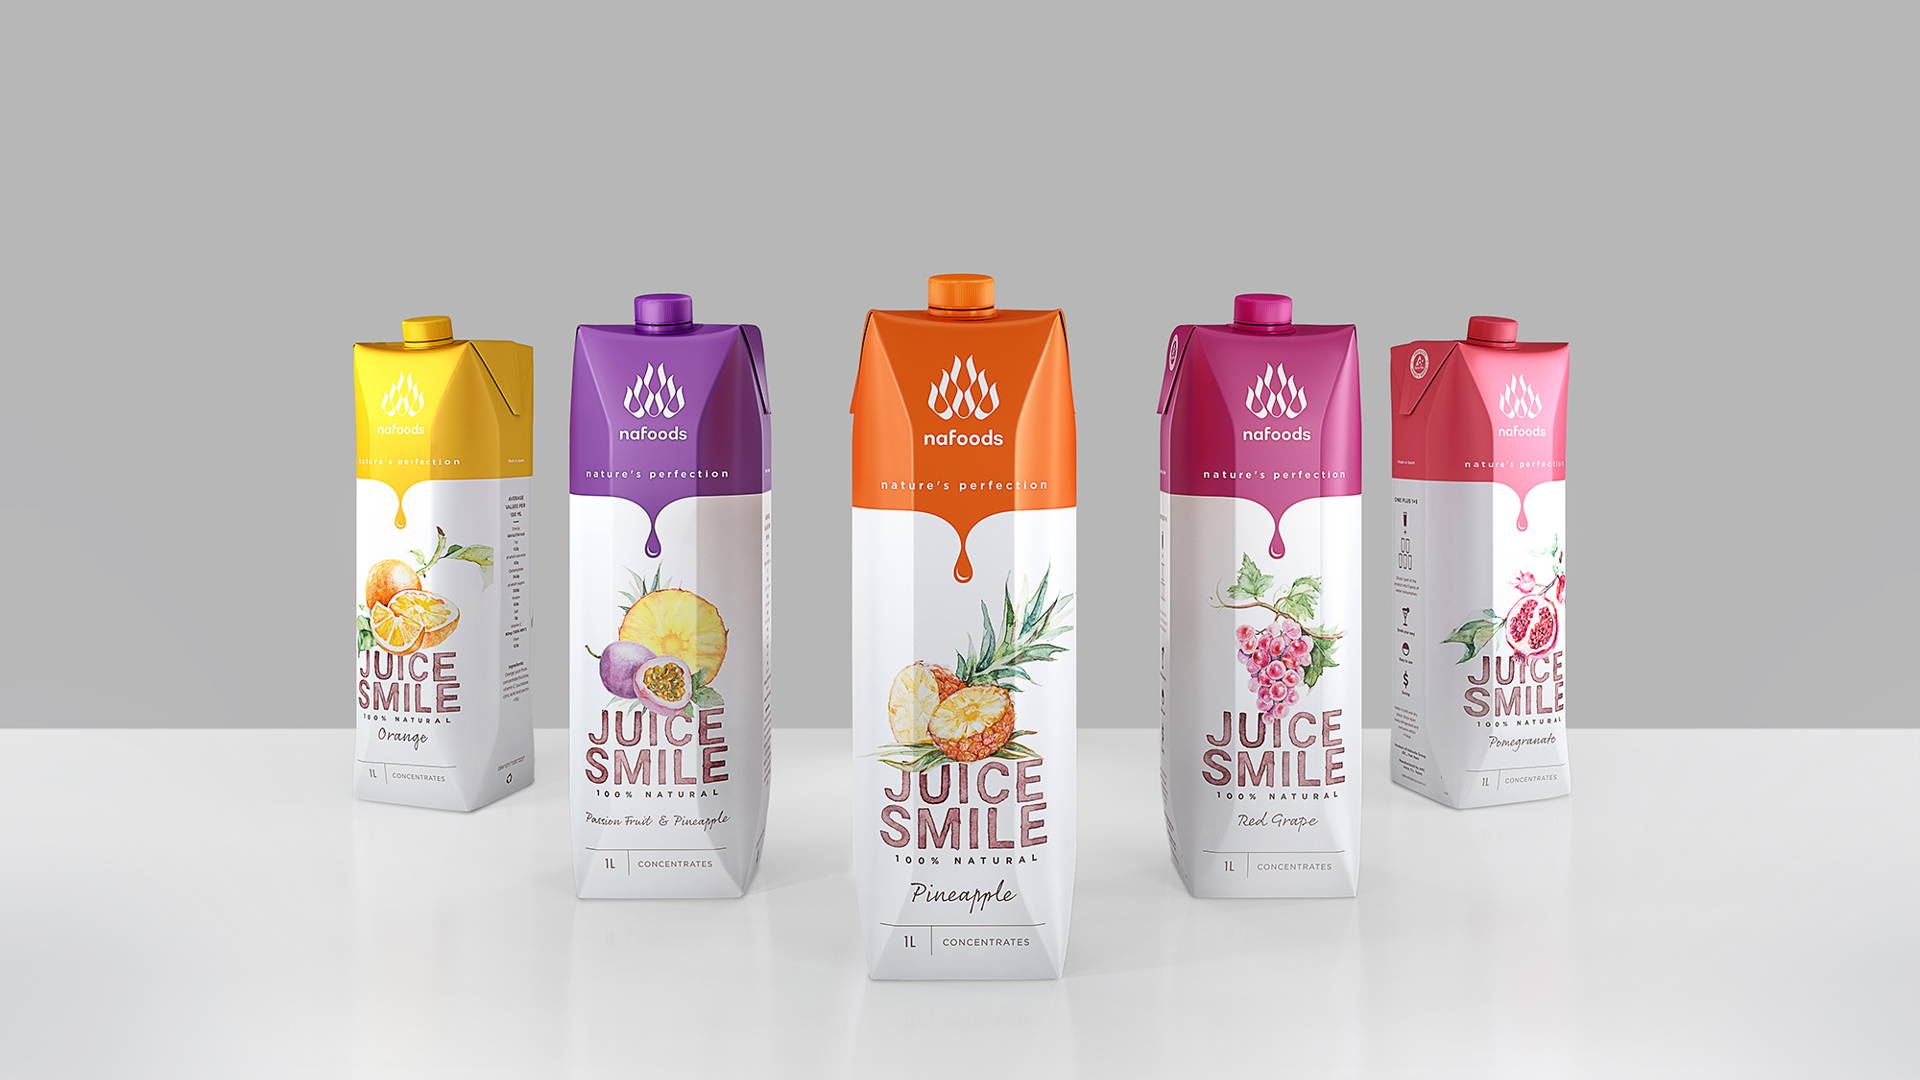 Featured image for "Juice Smile" Is Serving Up Freshness With Smiles